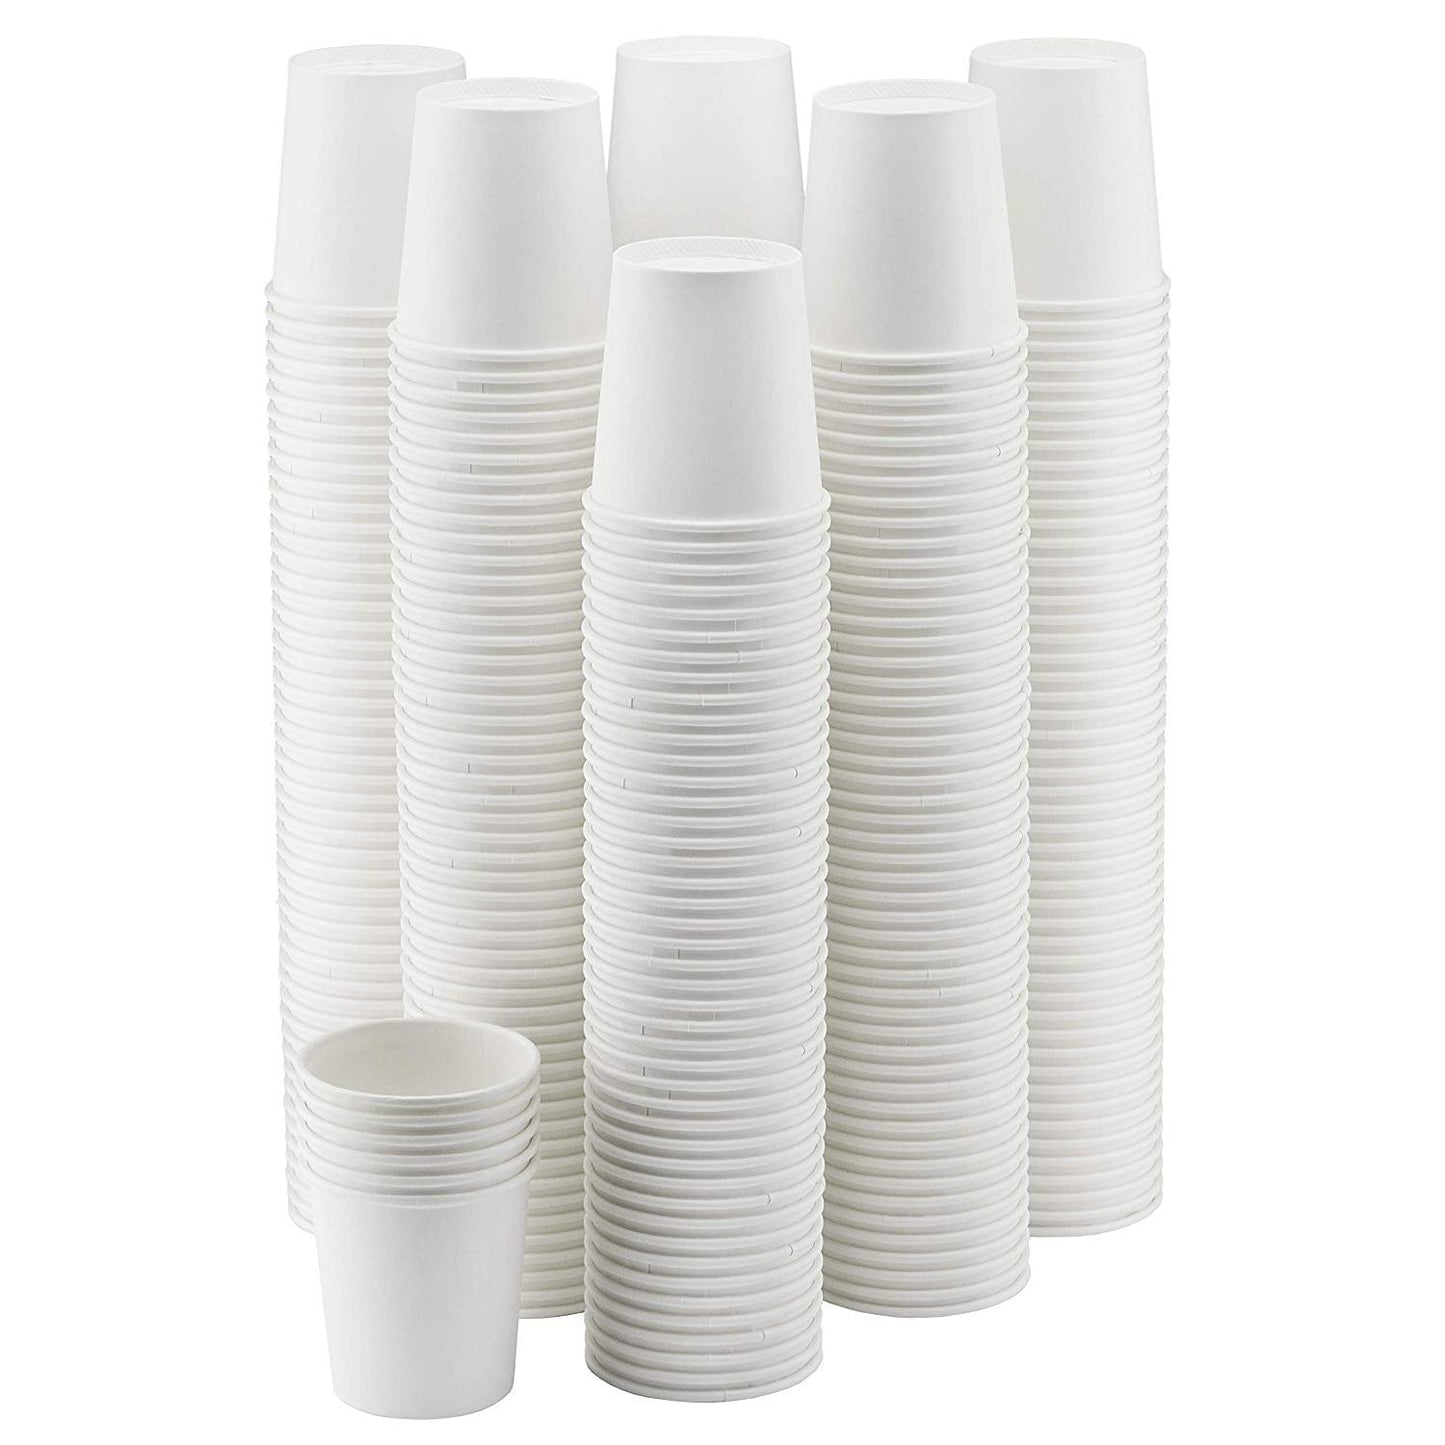 NYHI 300-Pack 4 oz. White Paper Disposable Cups – Hot/Cold Beverage Drinking Cup for Water, Juice, Coffee or Tea – Ideal for Water Coolers, Party, or Coffee On the Go’ - NY-HI